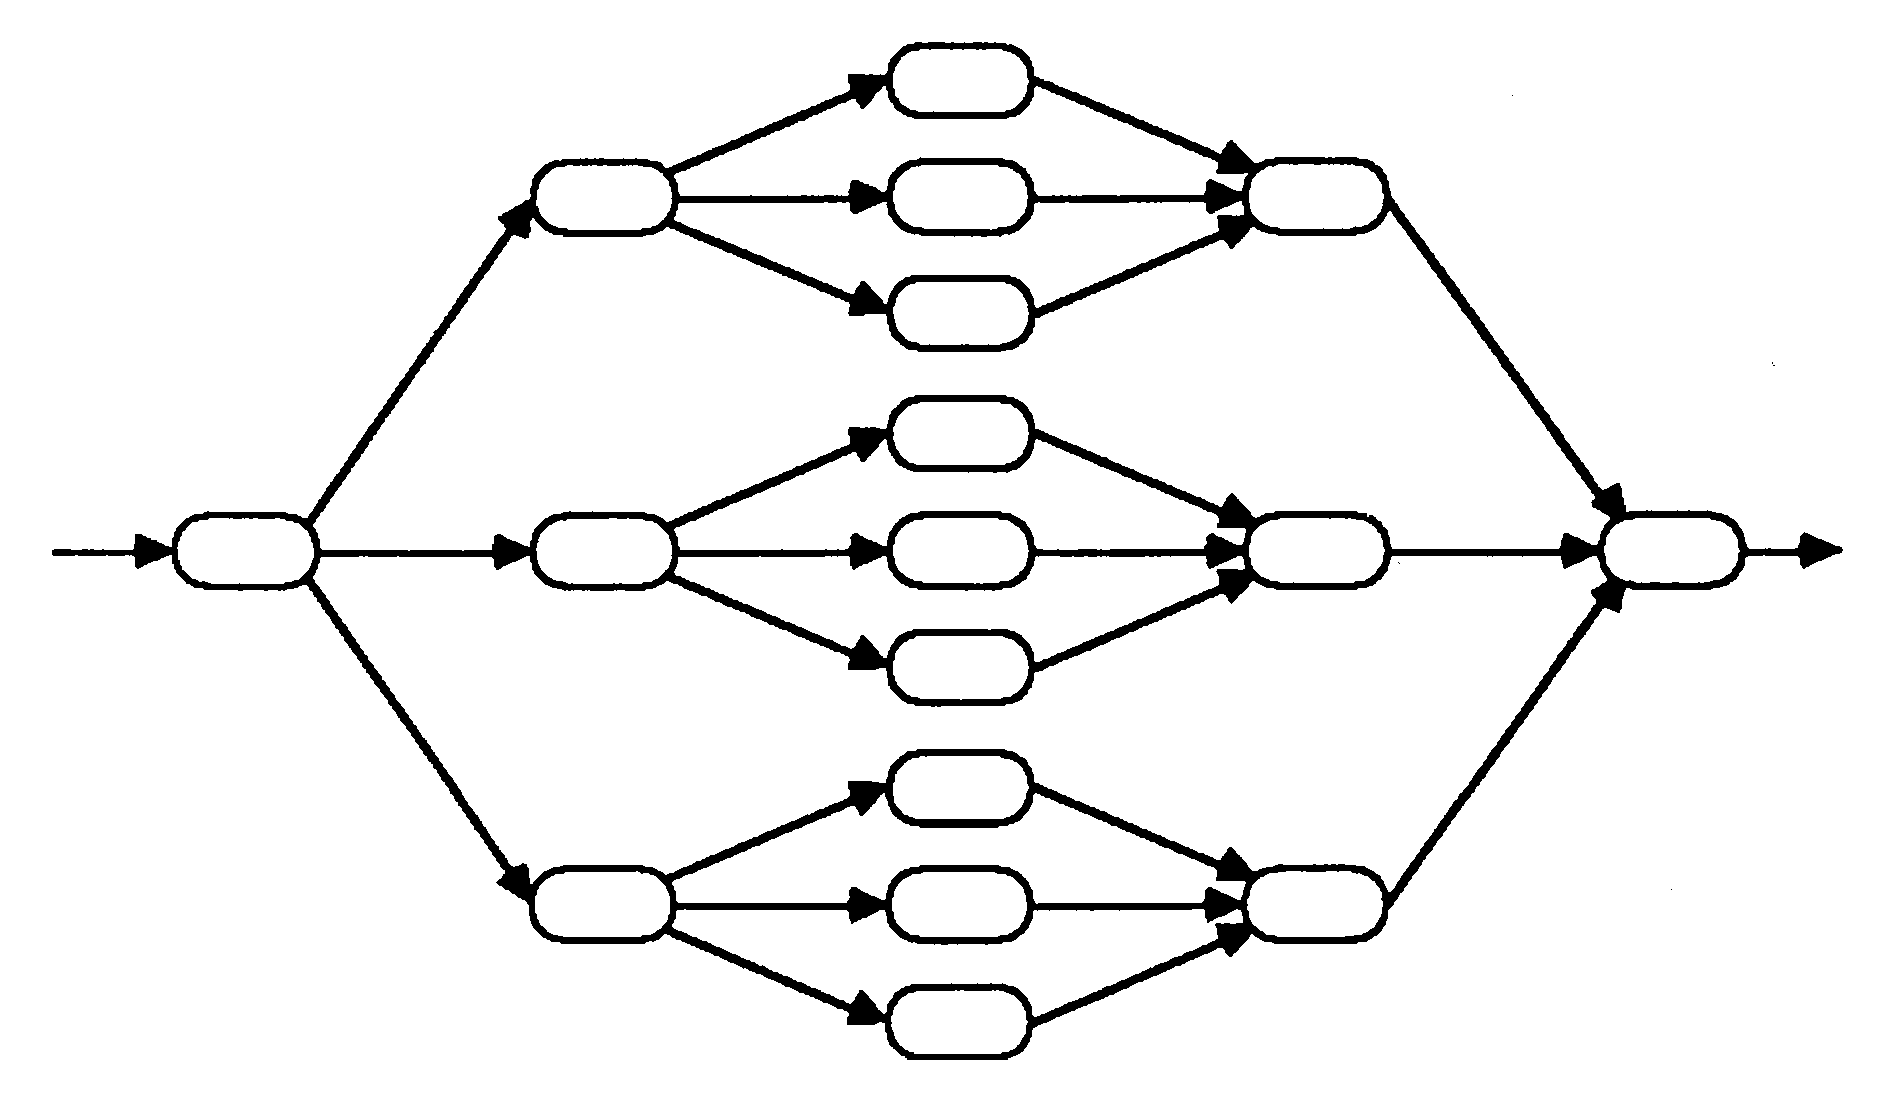 Tree structure